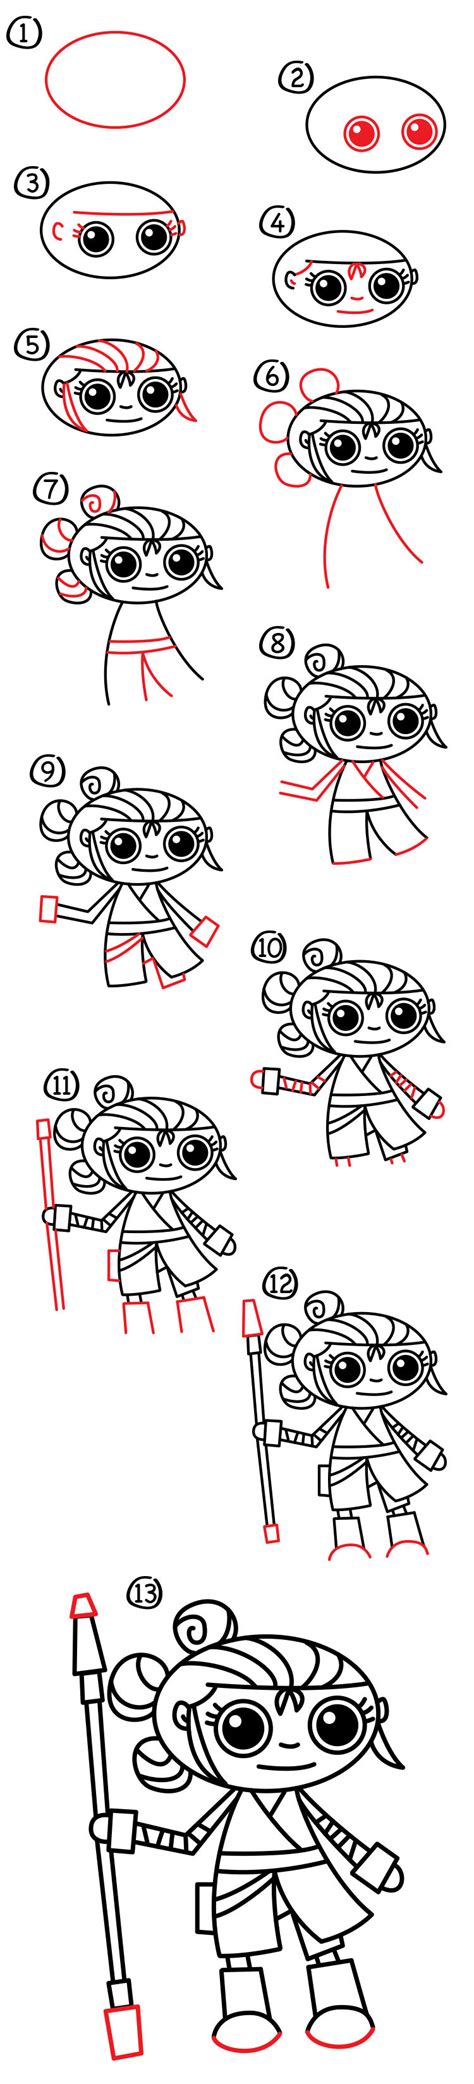 How To Draw A Cartoon Rey From Star Wars - Art for Kids Hub